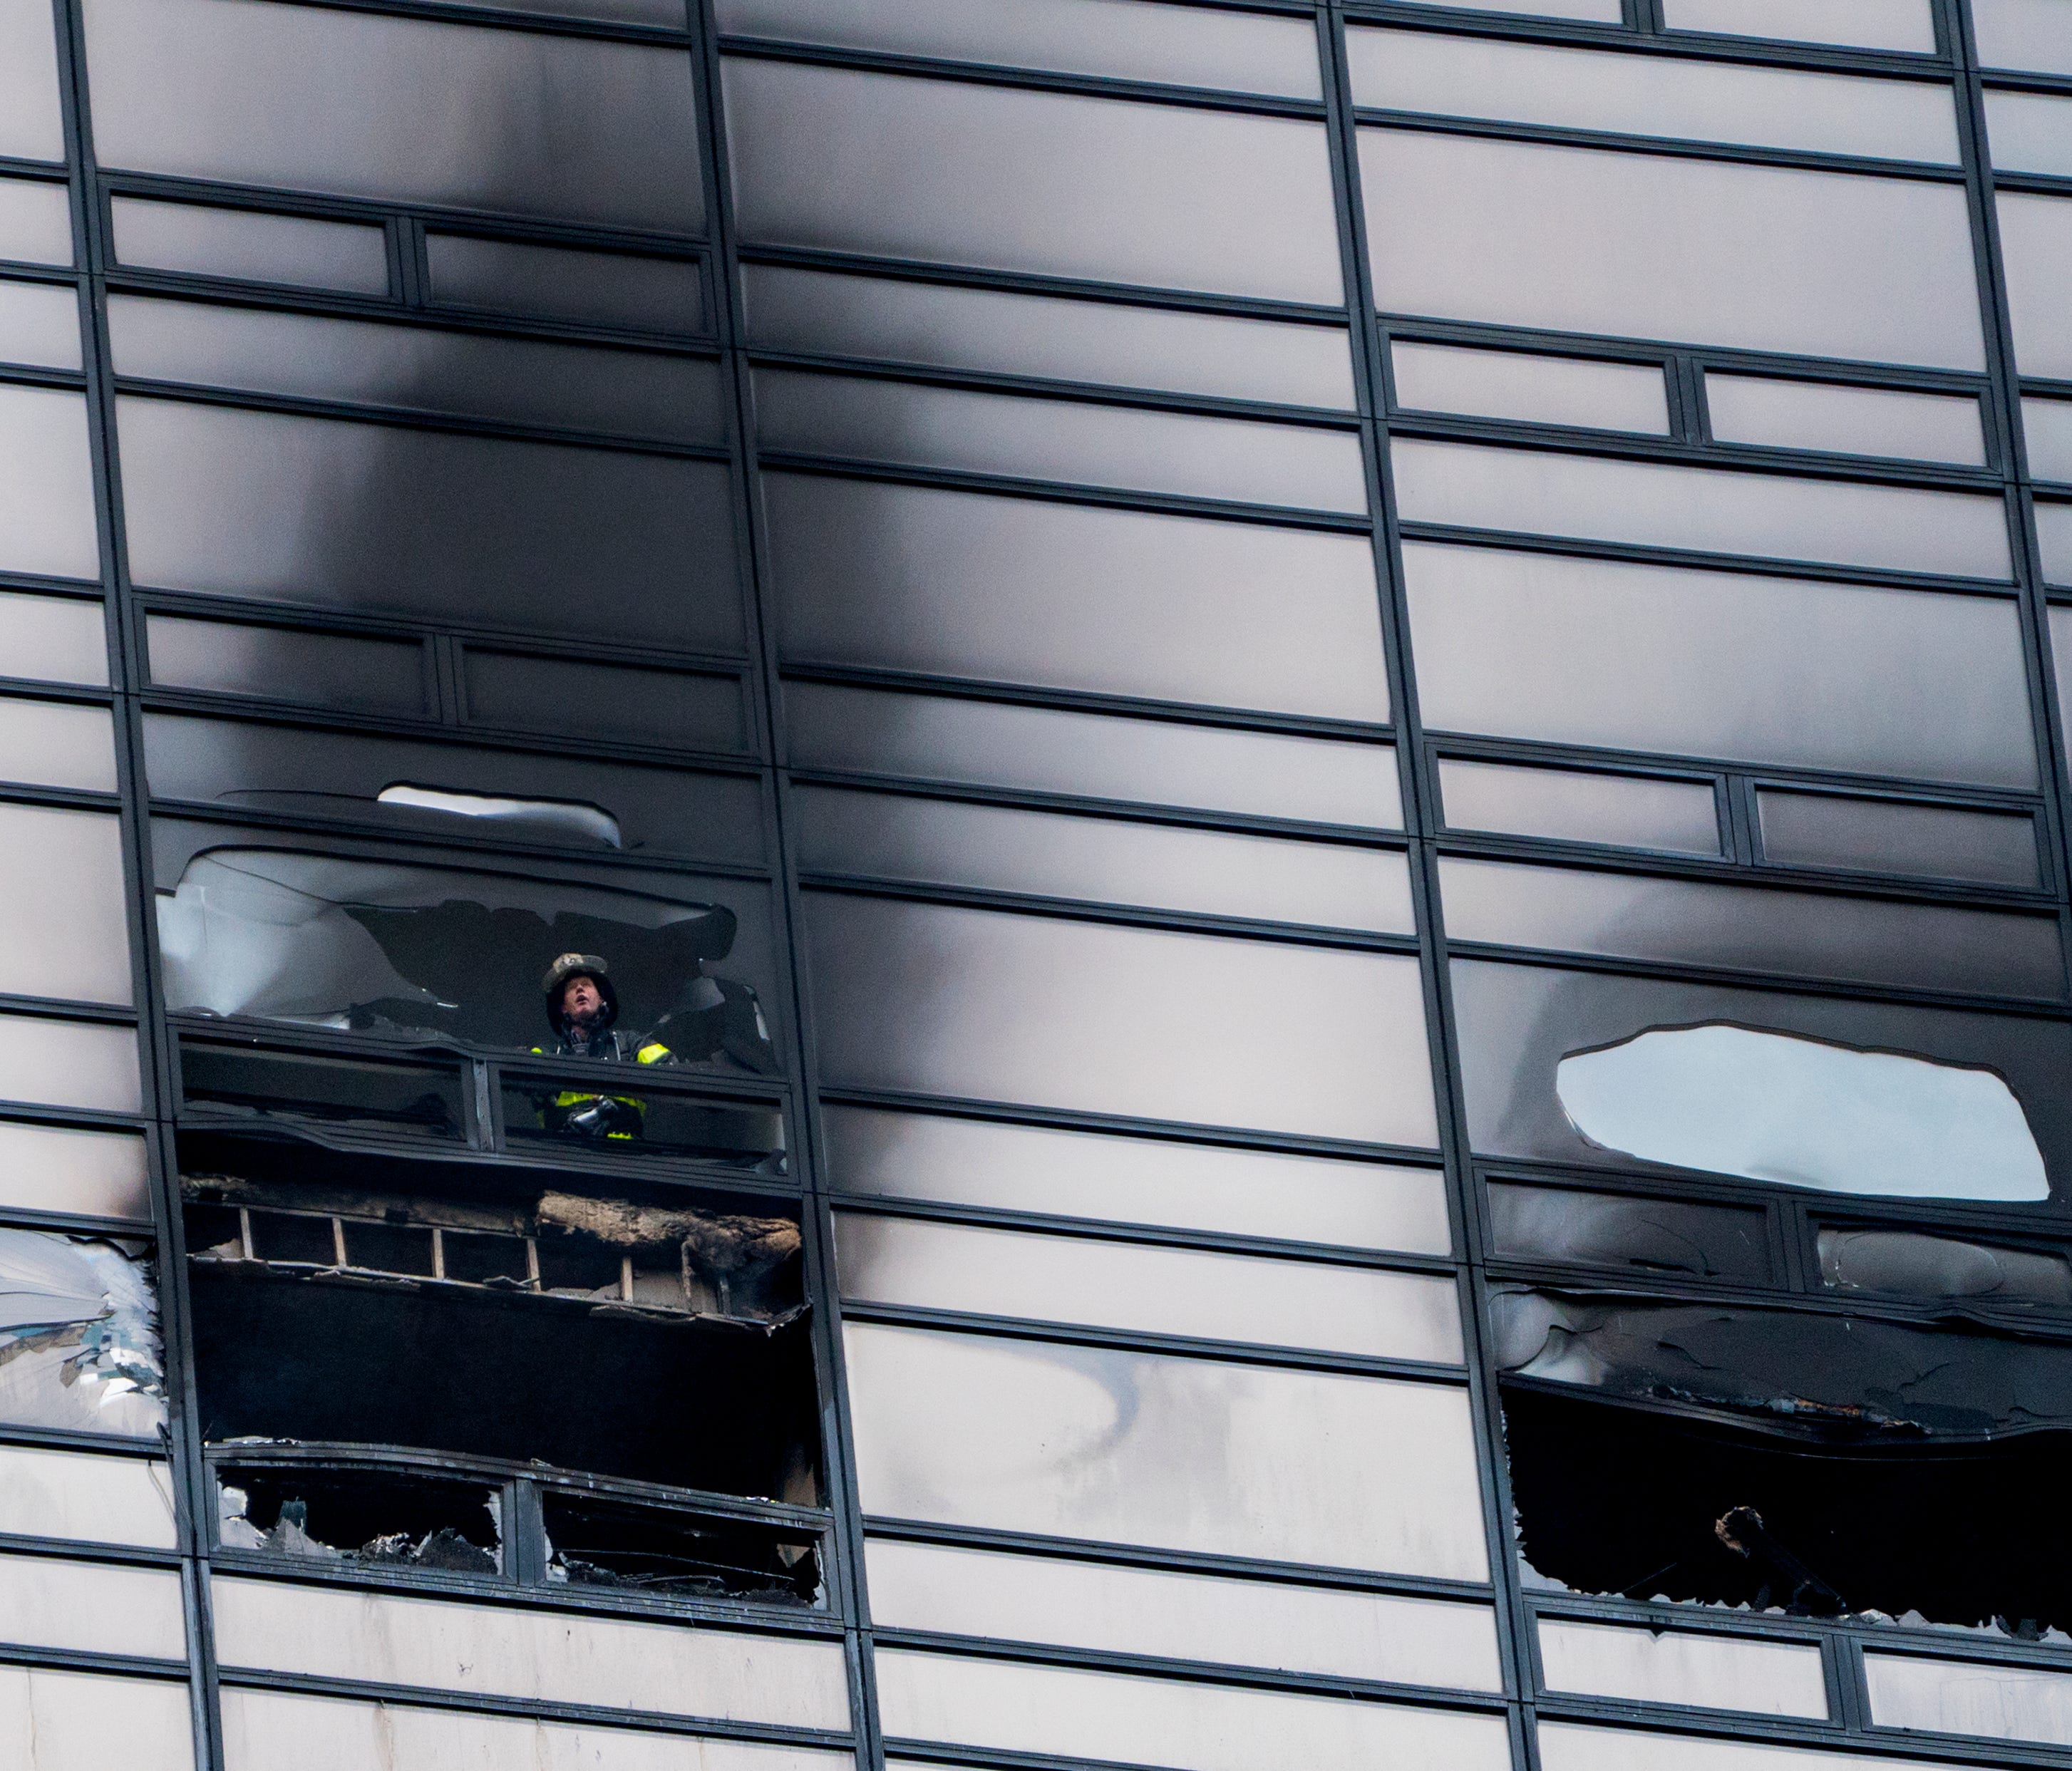 A firefighter looks out from the window of a damaged apartment in Trump Tower in New York on Saturday, April 7, 2018.